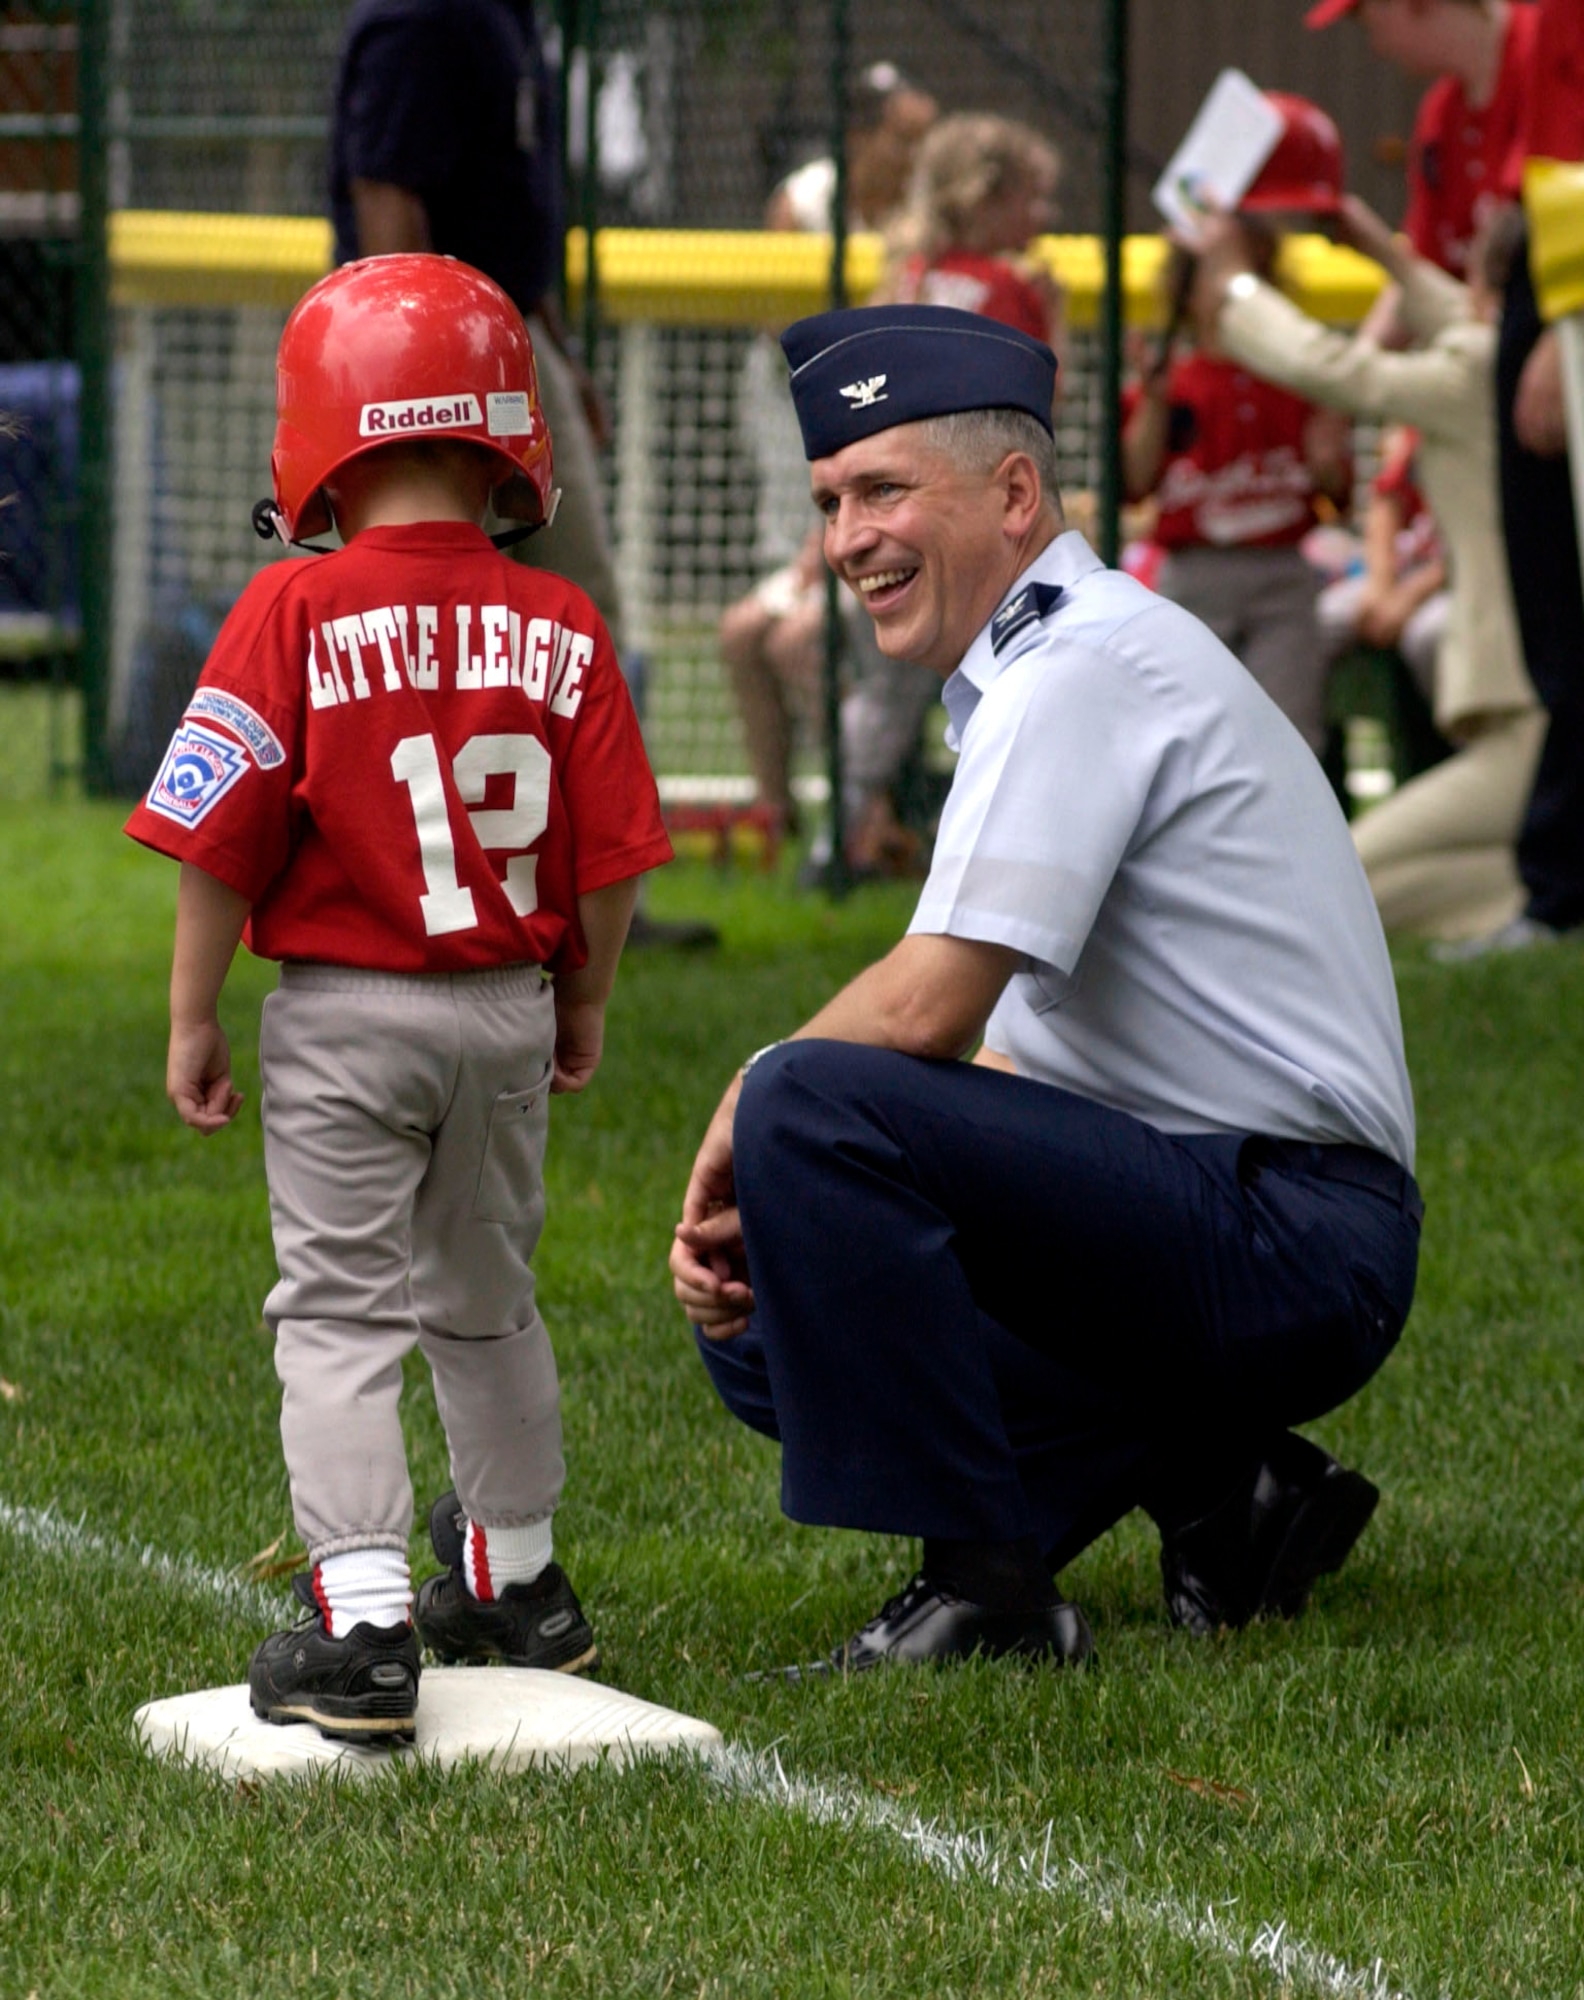 Col. Frederick Martin talks with 4-year-old Alex McPeak at third base during a game on the South Lawn of the White House on Friday, June 23, that marks the official start of the Little League Season.  Alex's mother, Danielle, is the coach of the Yankees team from McGuire Air Force Base, N.J. His father, Master Sgt. Todd McPeak, is deployed. Colonel Martin, assigned at McGuire, served as the third base coach for both the McGuire team and the Dolcom Little League Indians from Naval Submarine Base New London in Groton, Conn. (U.S. Air Force photo/Tech. Sgt. Cohen A. Young) 